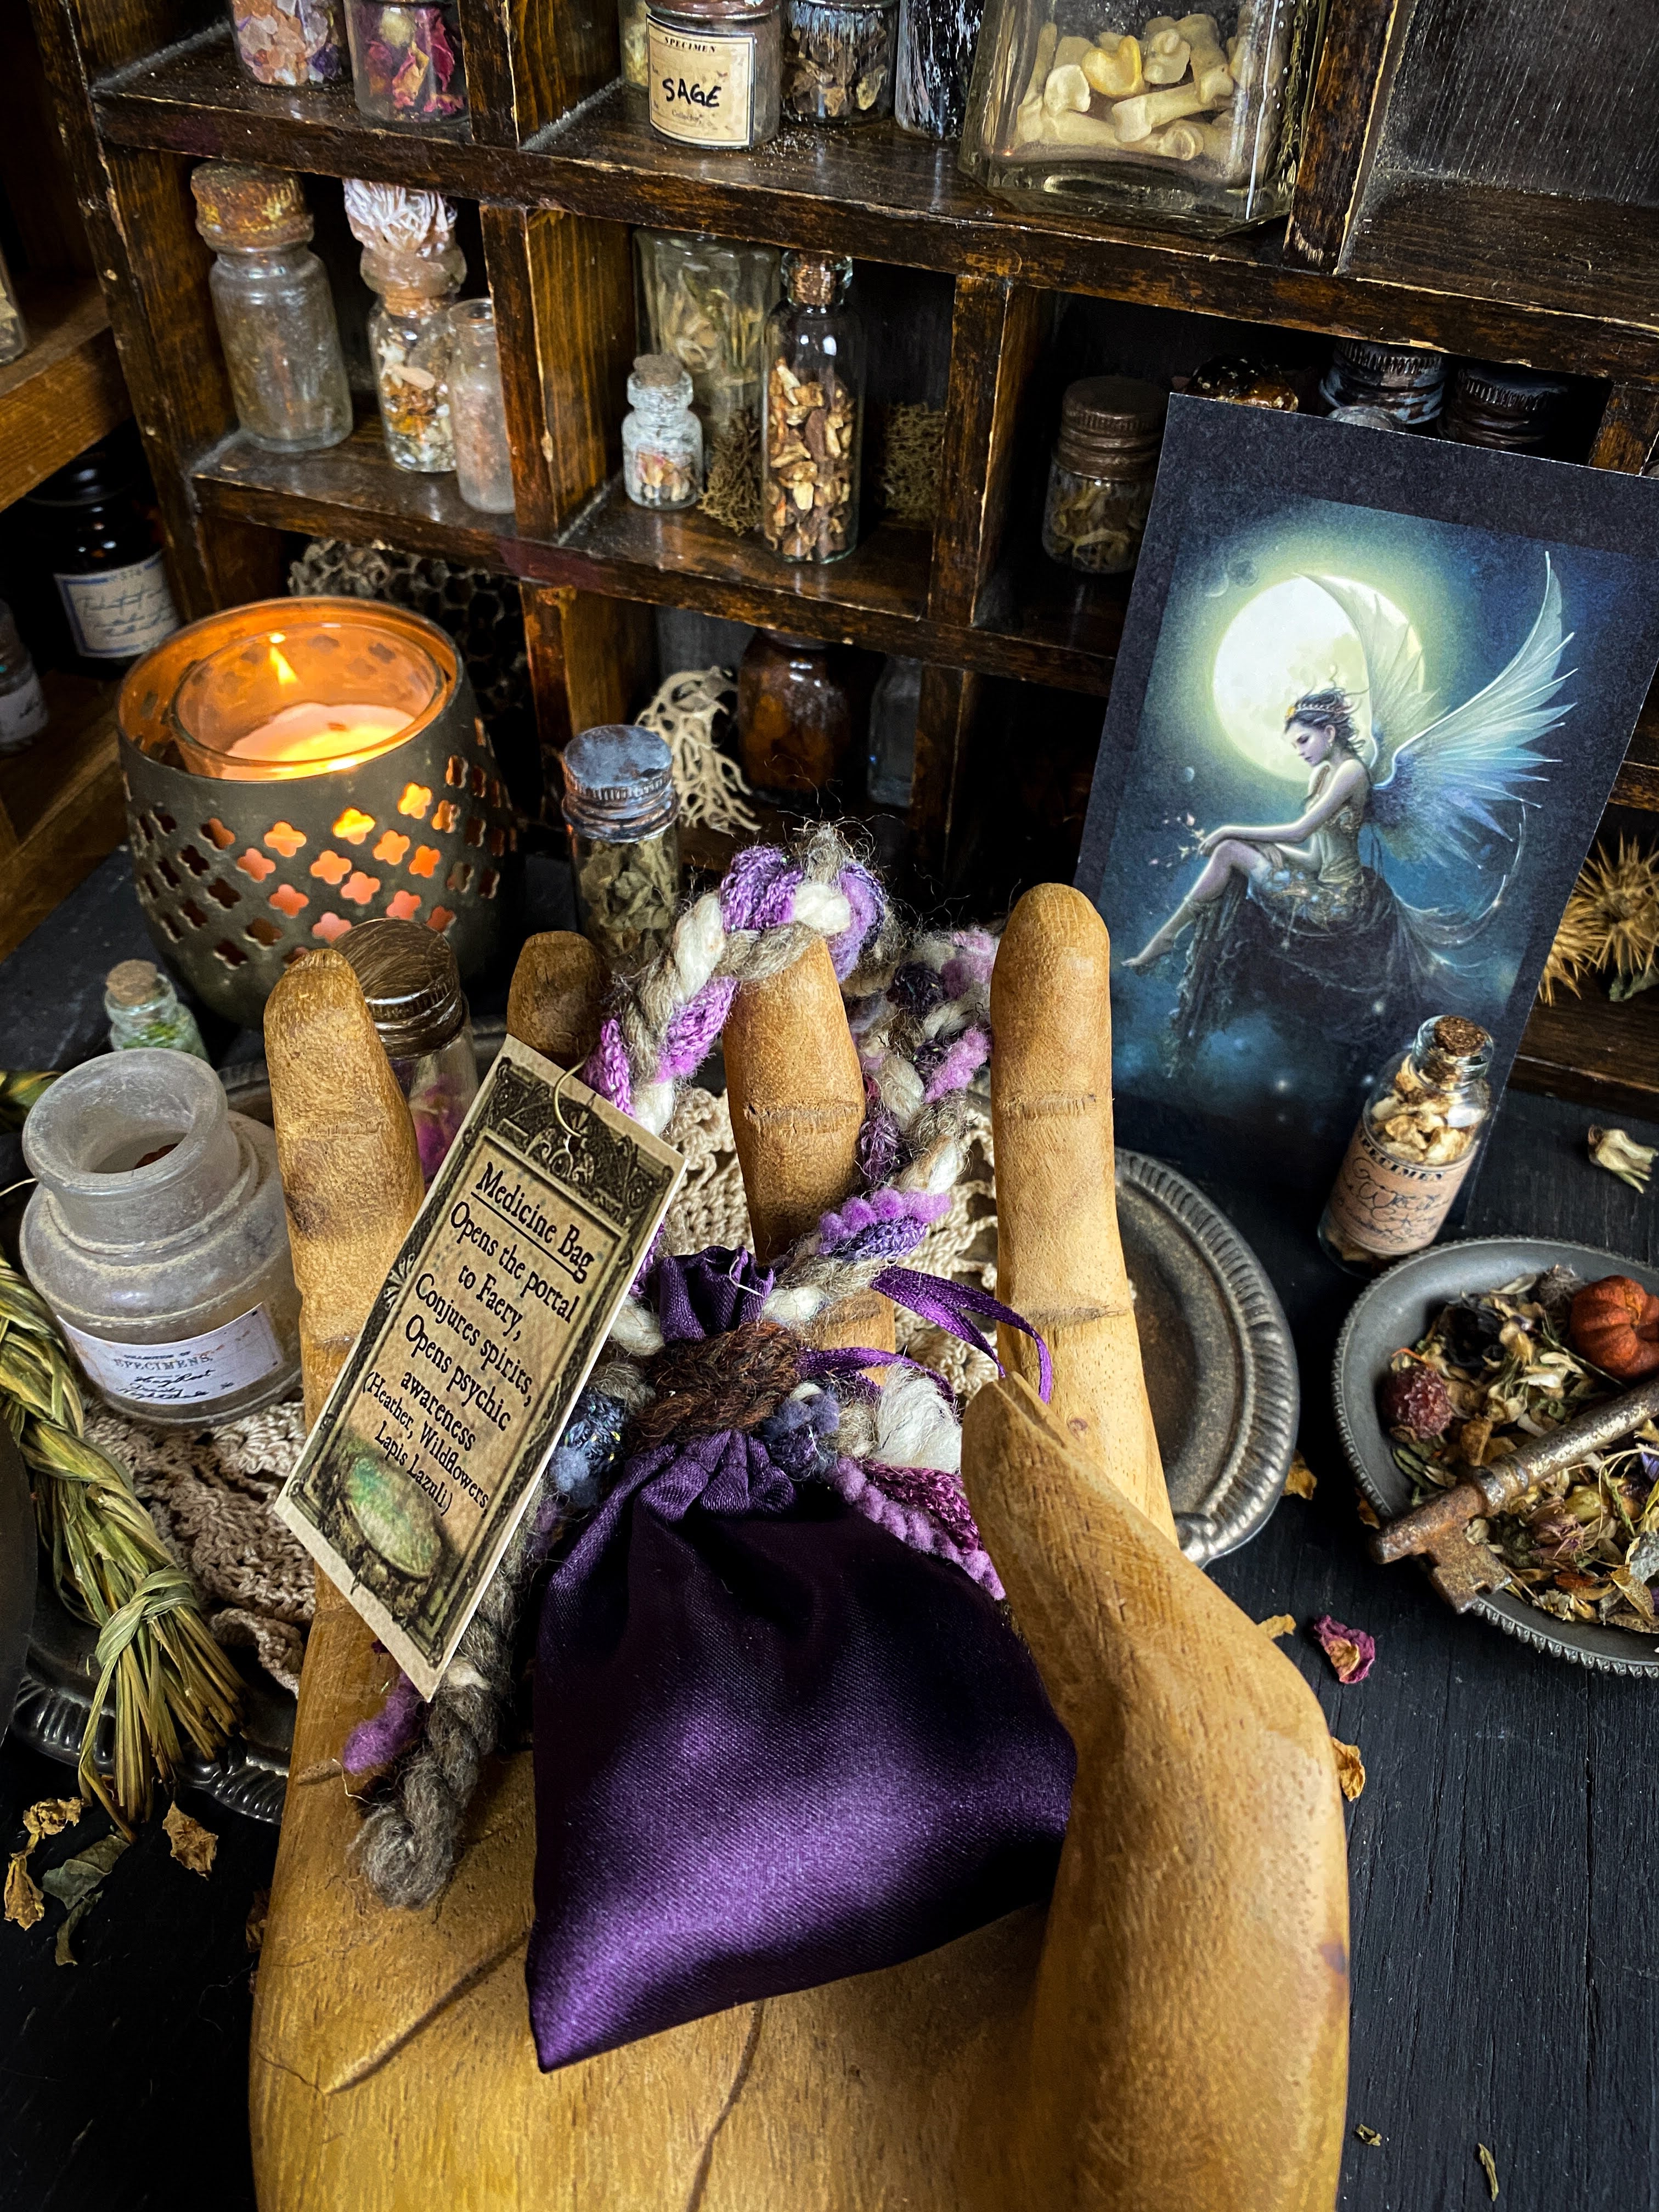 Intuitively Crafted Medicine Bag - Opens the Portal to Faery + Enhances Psychic Awareness